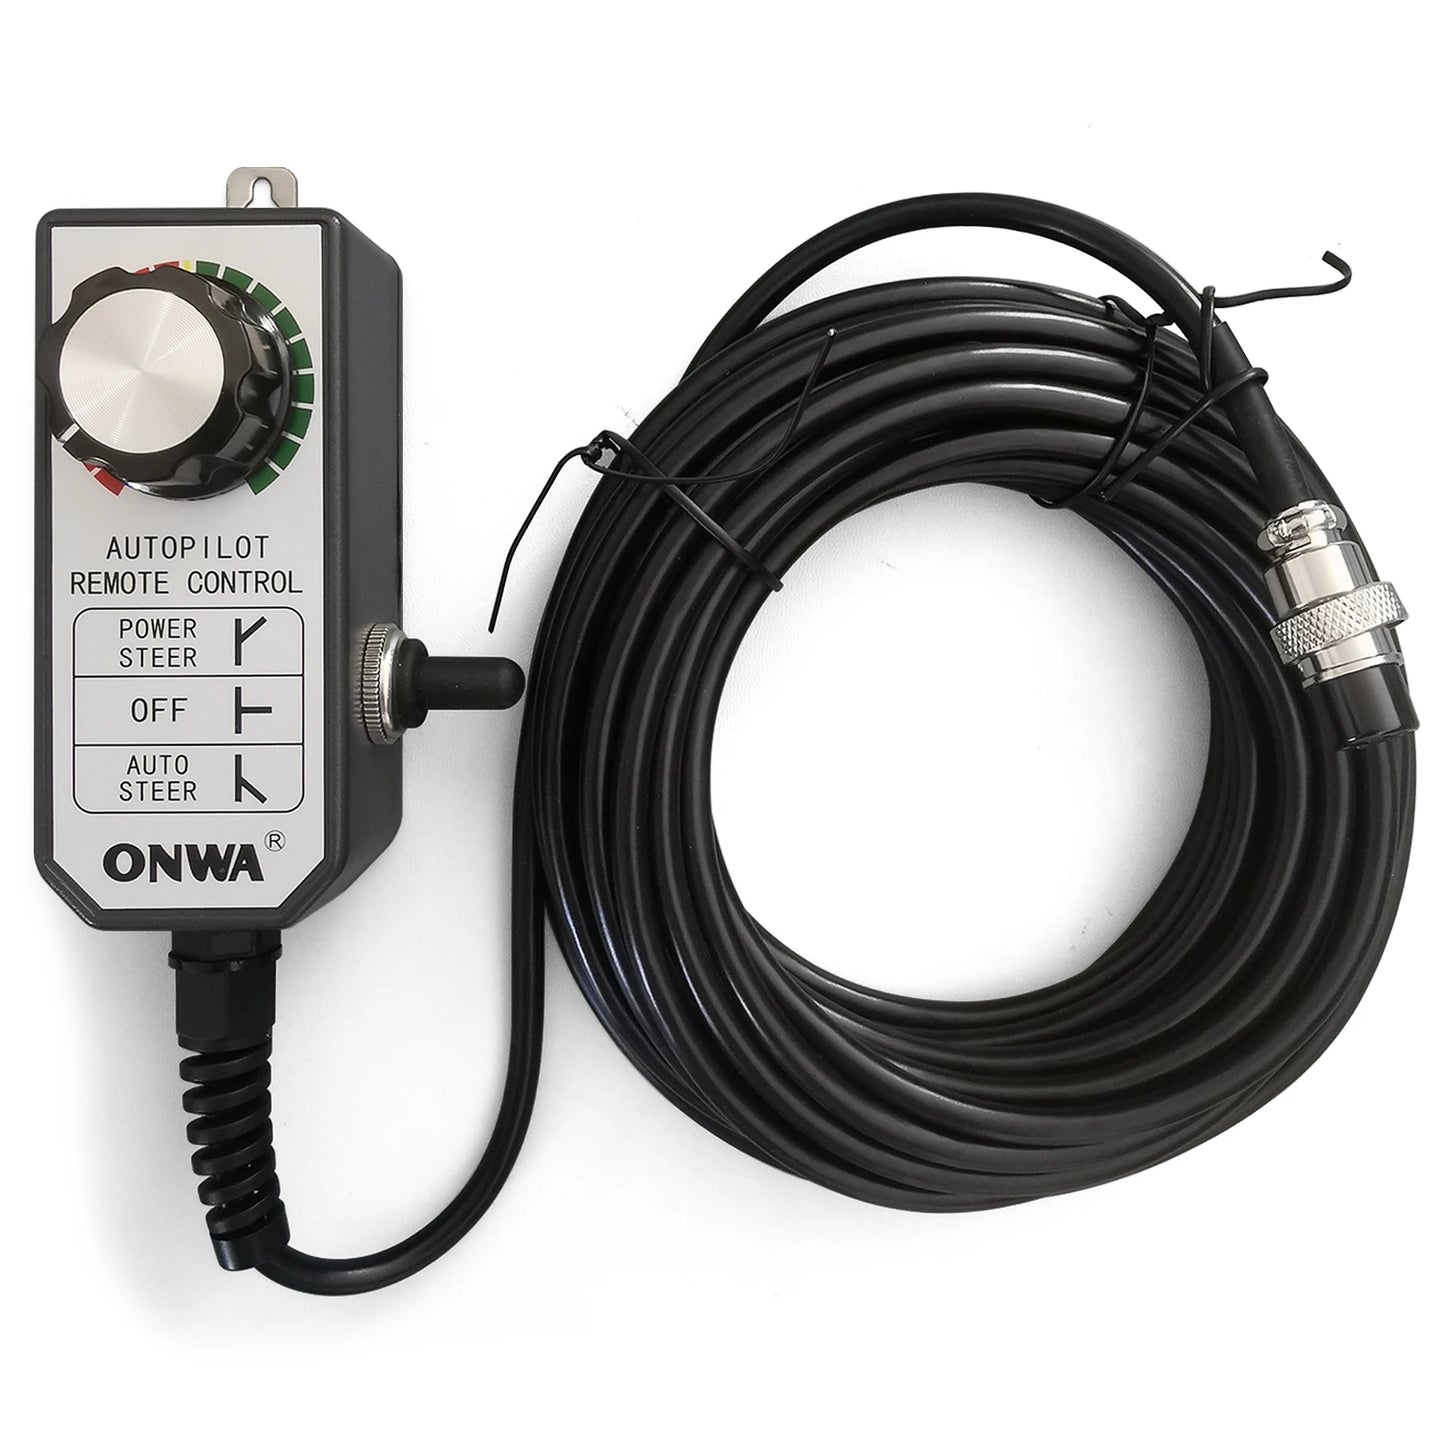 ONWA RT-580 HAND REMOTE CONTROLLER For autopilot system Marine Autopilot System (Auto Pilot)